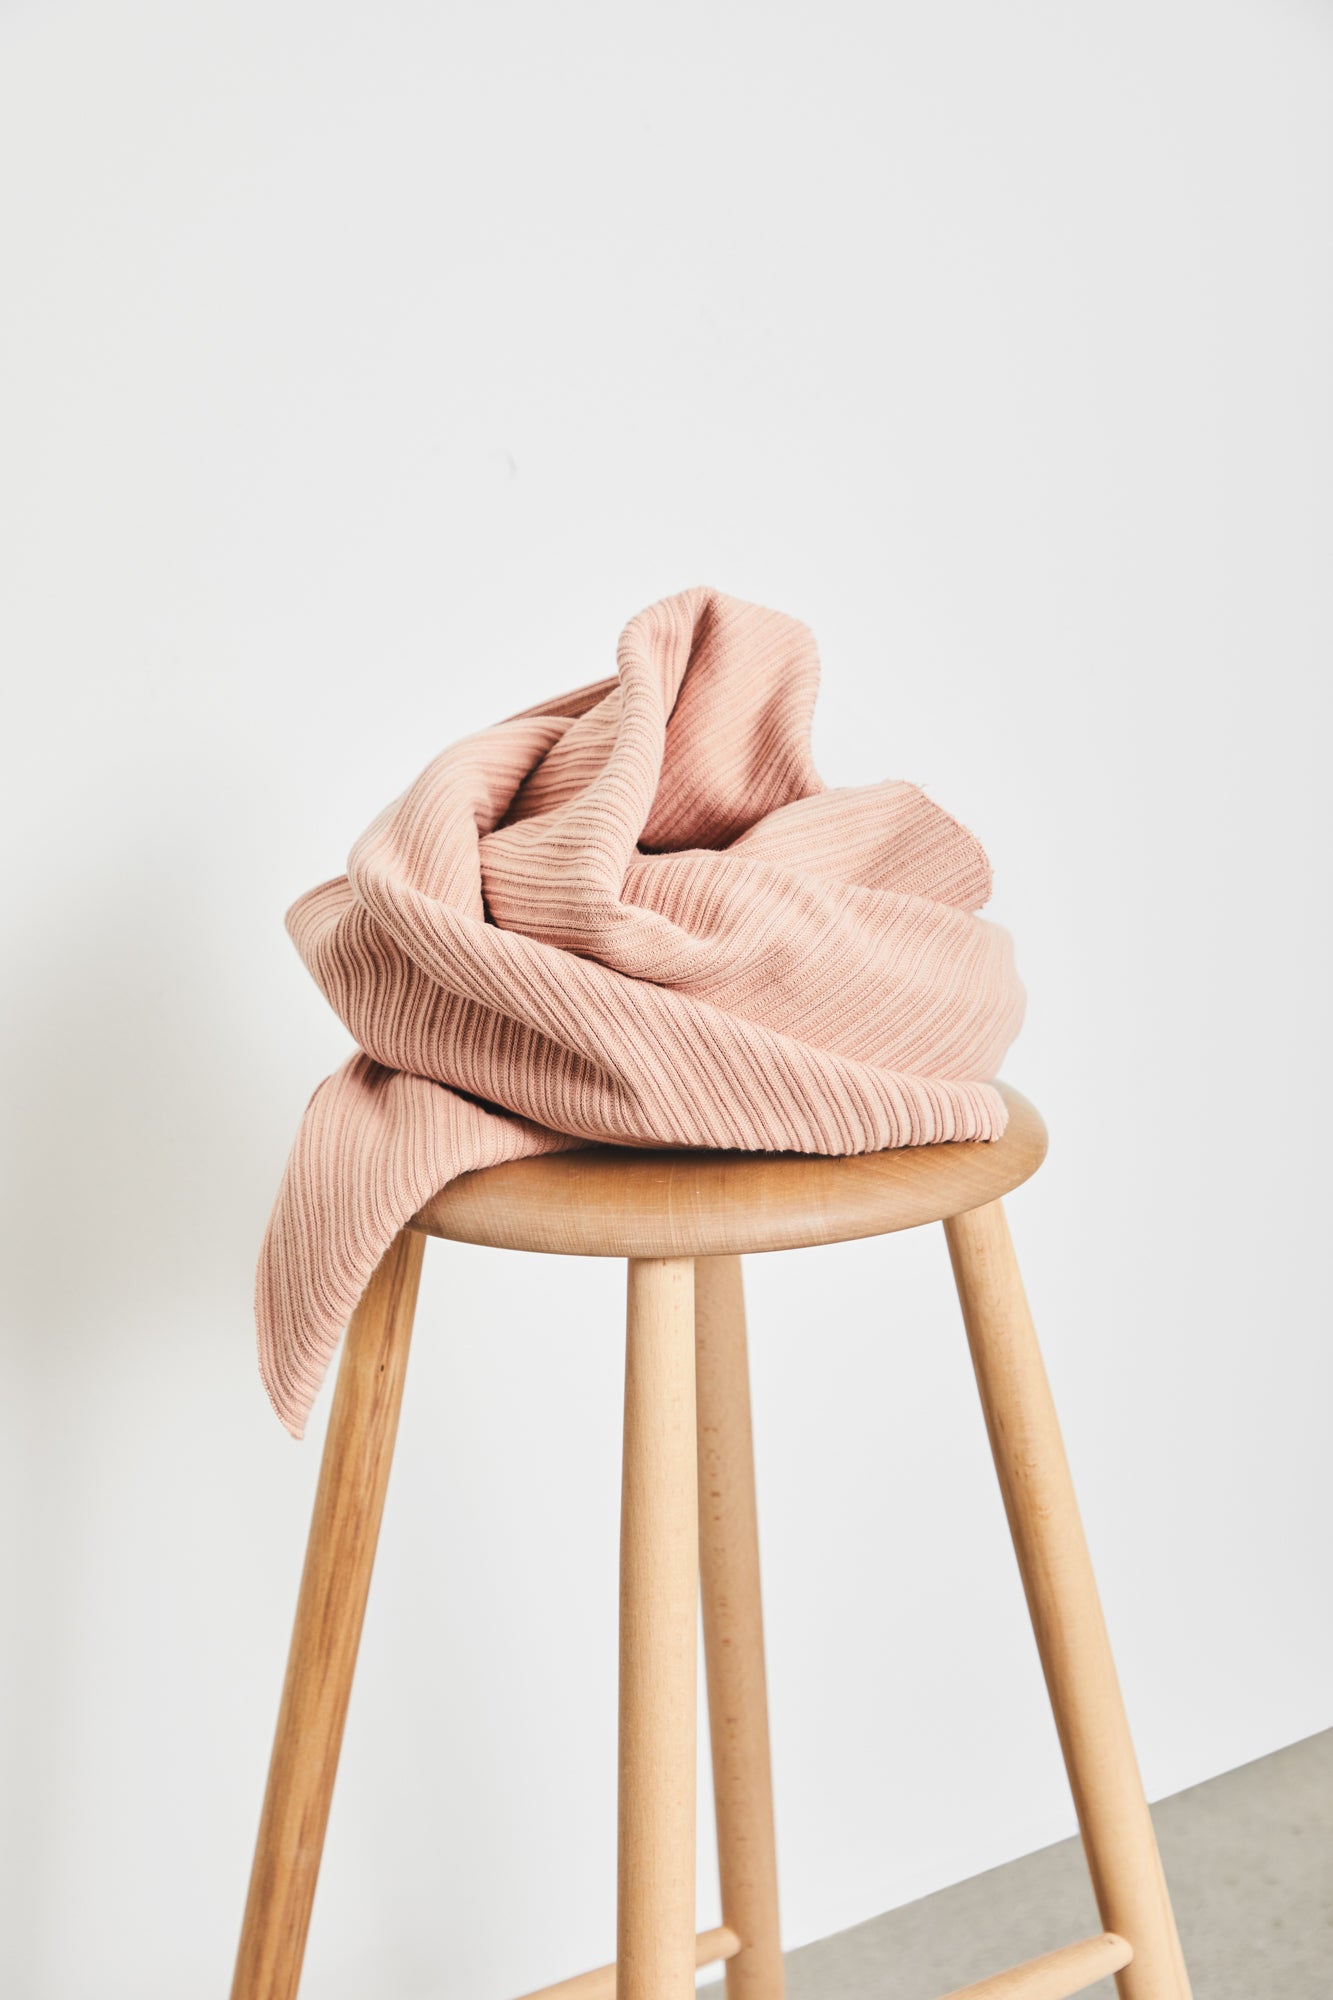 Chunky organic cotton ribbed knit fabric in colour rose (pale pink), piled on top of wooden stool